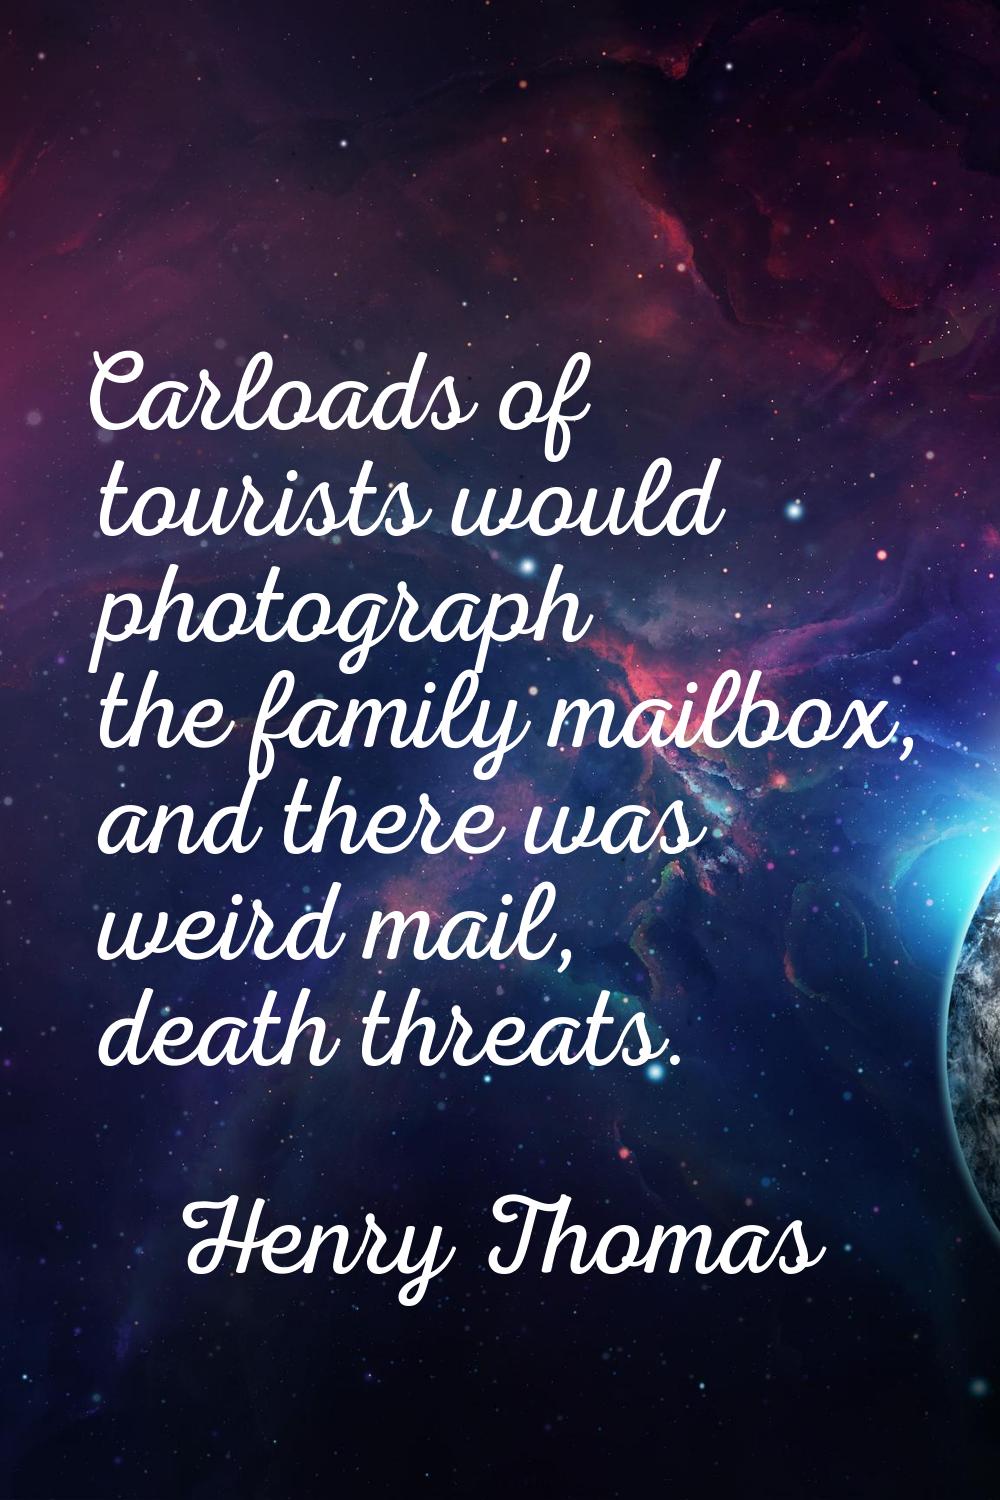 Carloads of tourists would photograph the family mailbox, and there was weird mail, death threats.